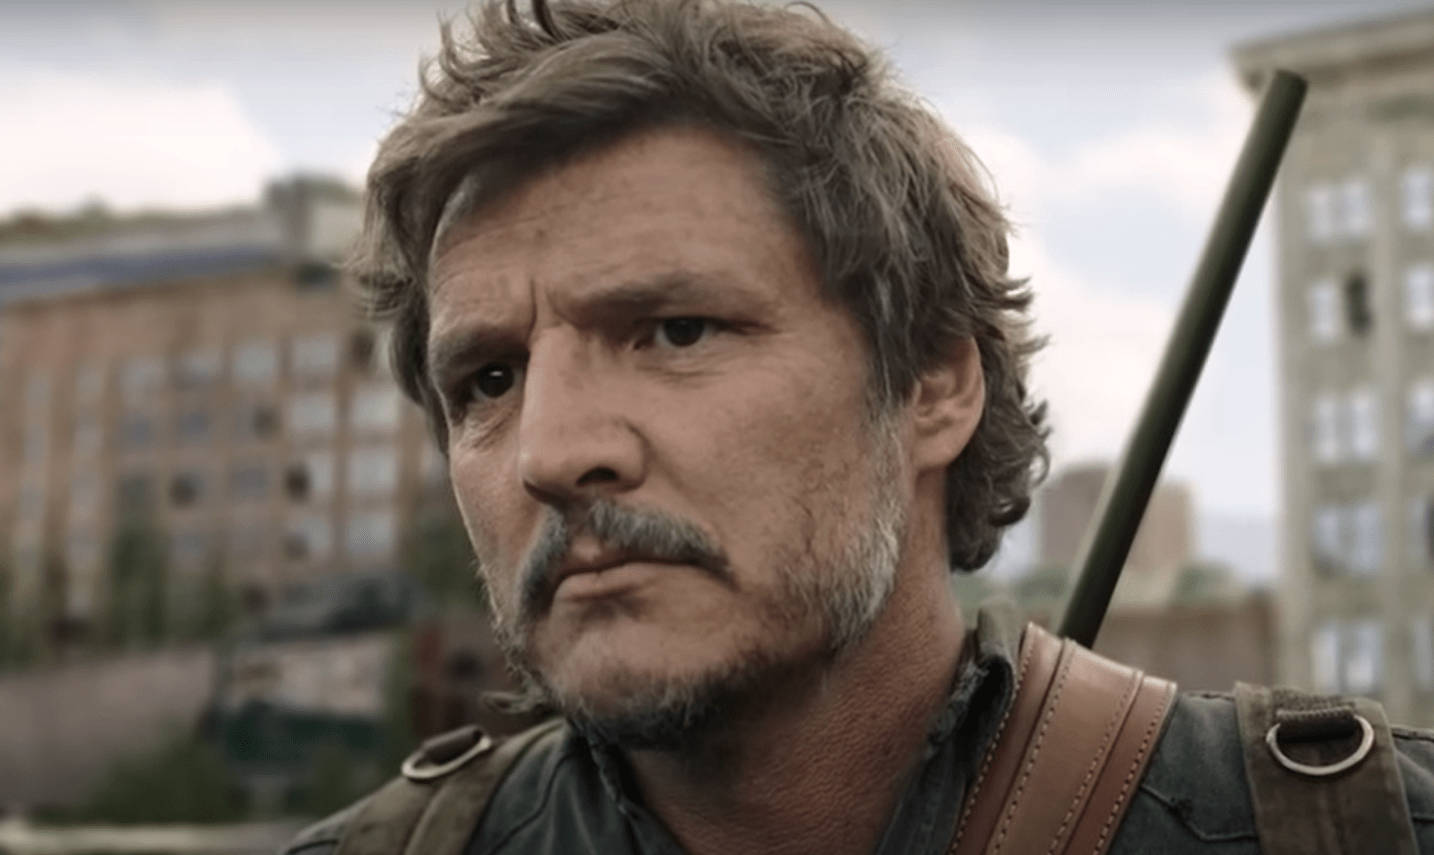 Image of Pedro Pascal as Joel on 'The last of Us' on HBO. Close-up image of Joel, who is outdoors and looking at something with a serious expression. His brown hair is shaggy, and he has a salt-and-pepper mustache and a light beard. He's wearing a rifle on his back and a green backpack and a greenish jacket. 